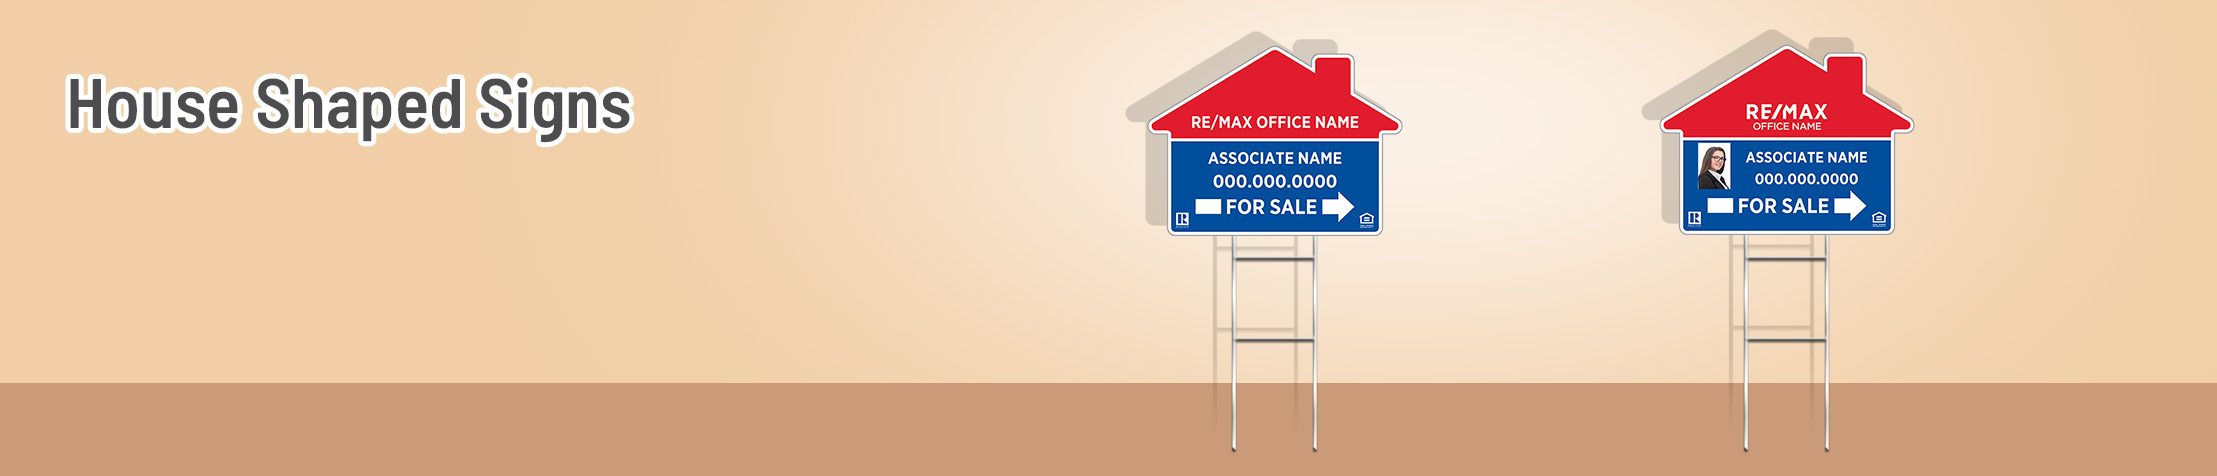 REMAX Real Estate House Shaped Signs - REMAX real estate signs | Sparkprint.com